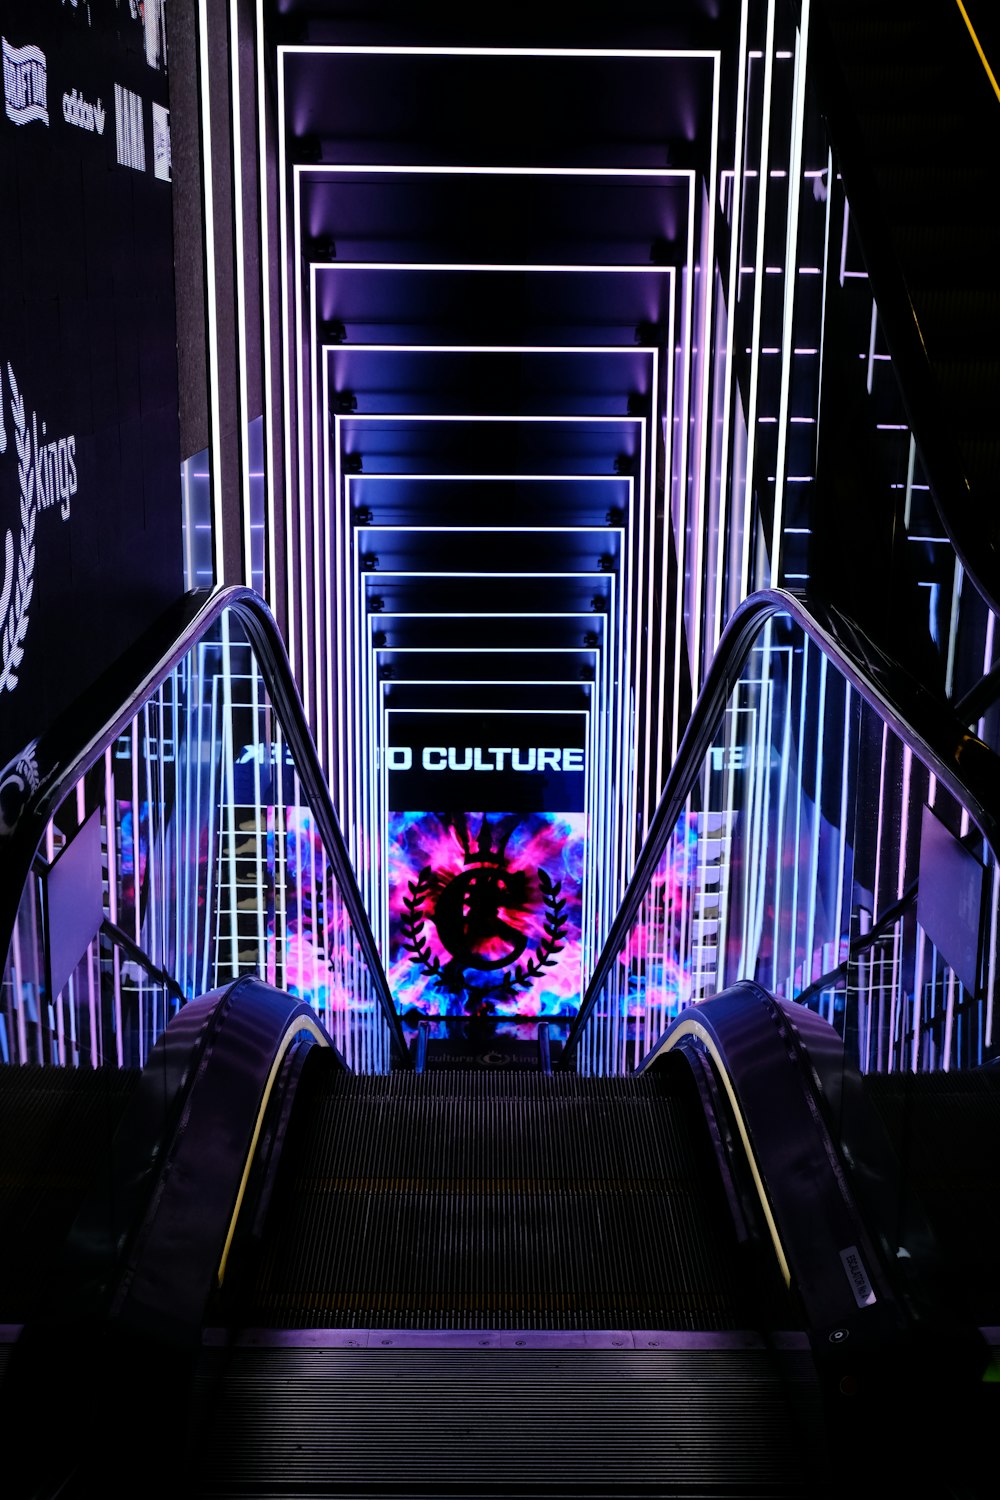 an escalator in a building with neon lights